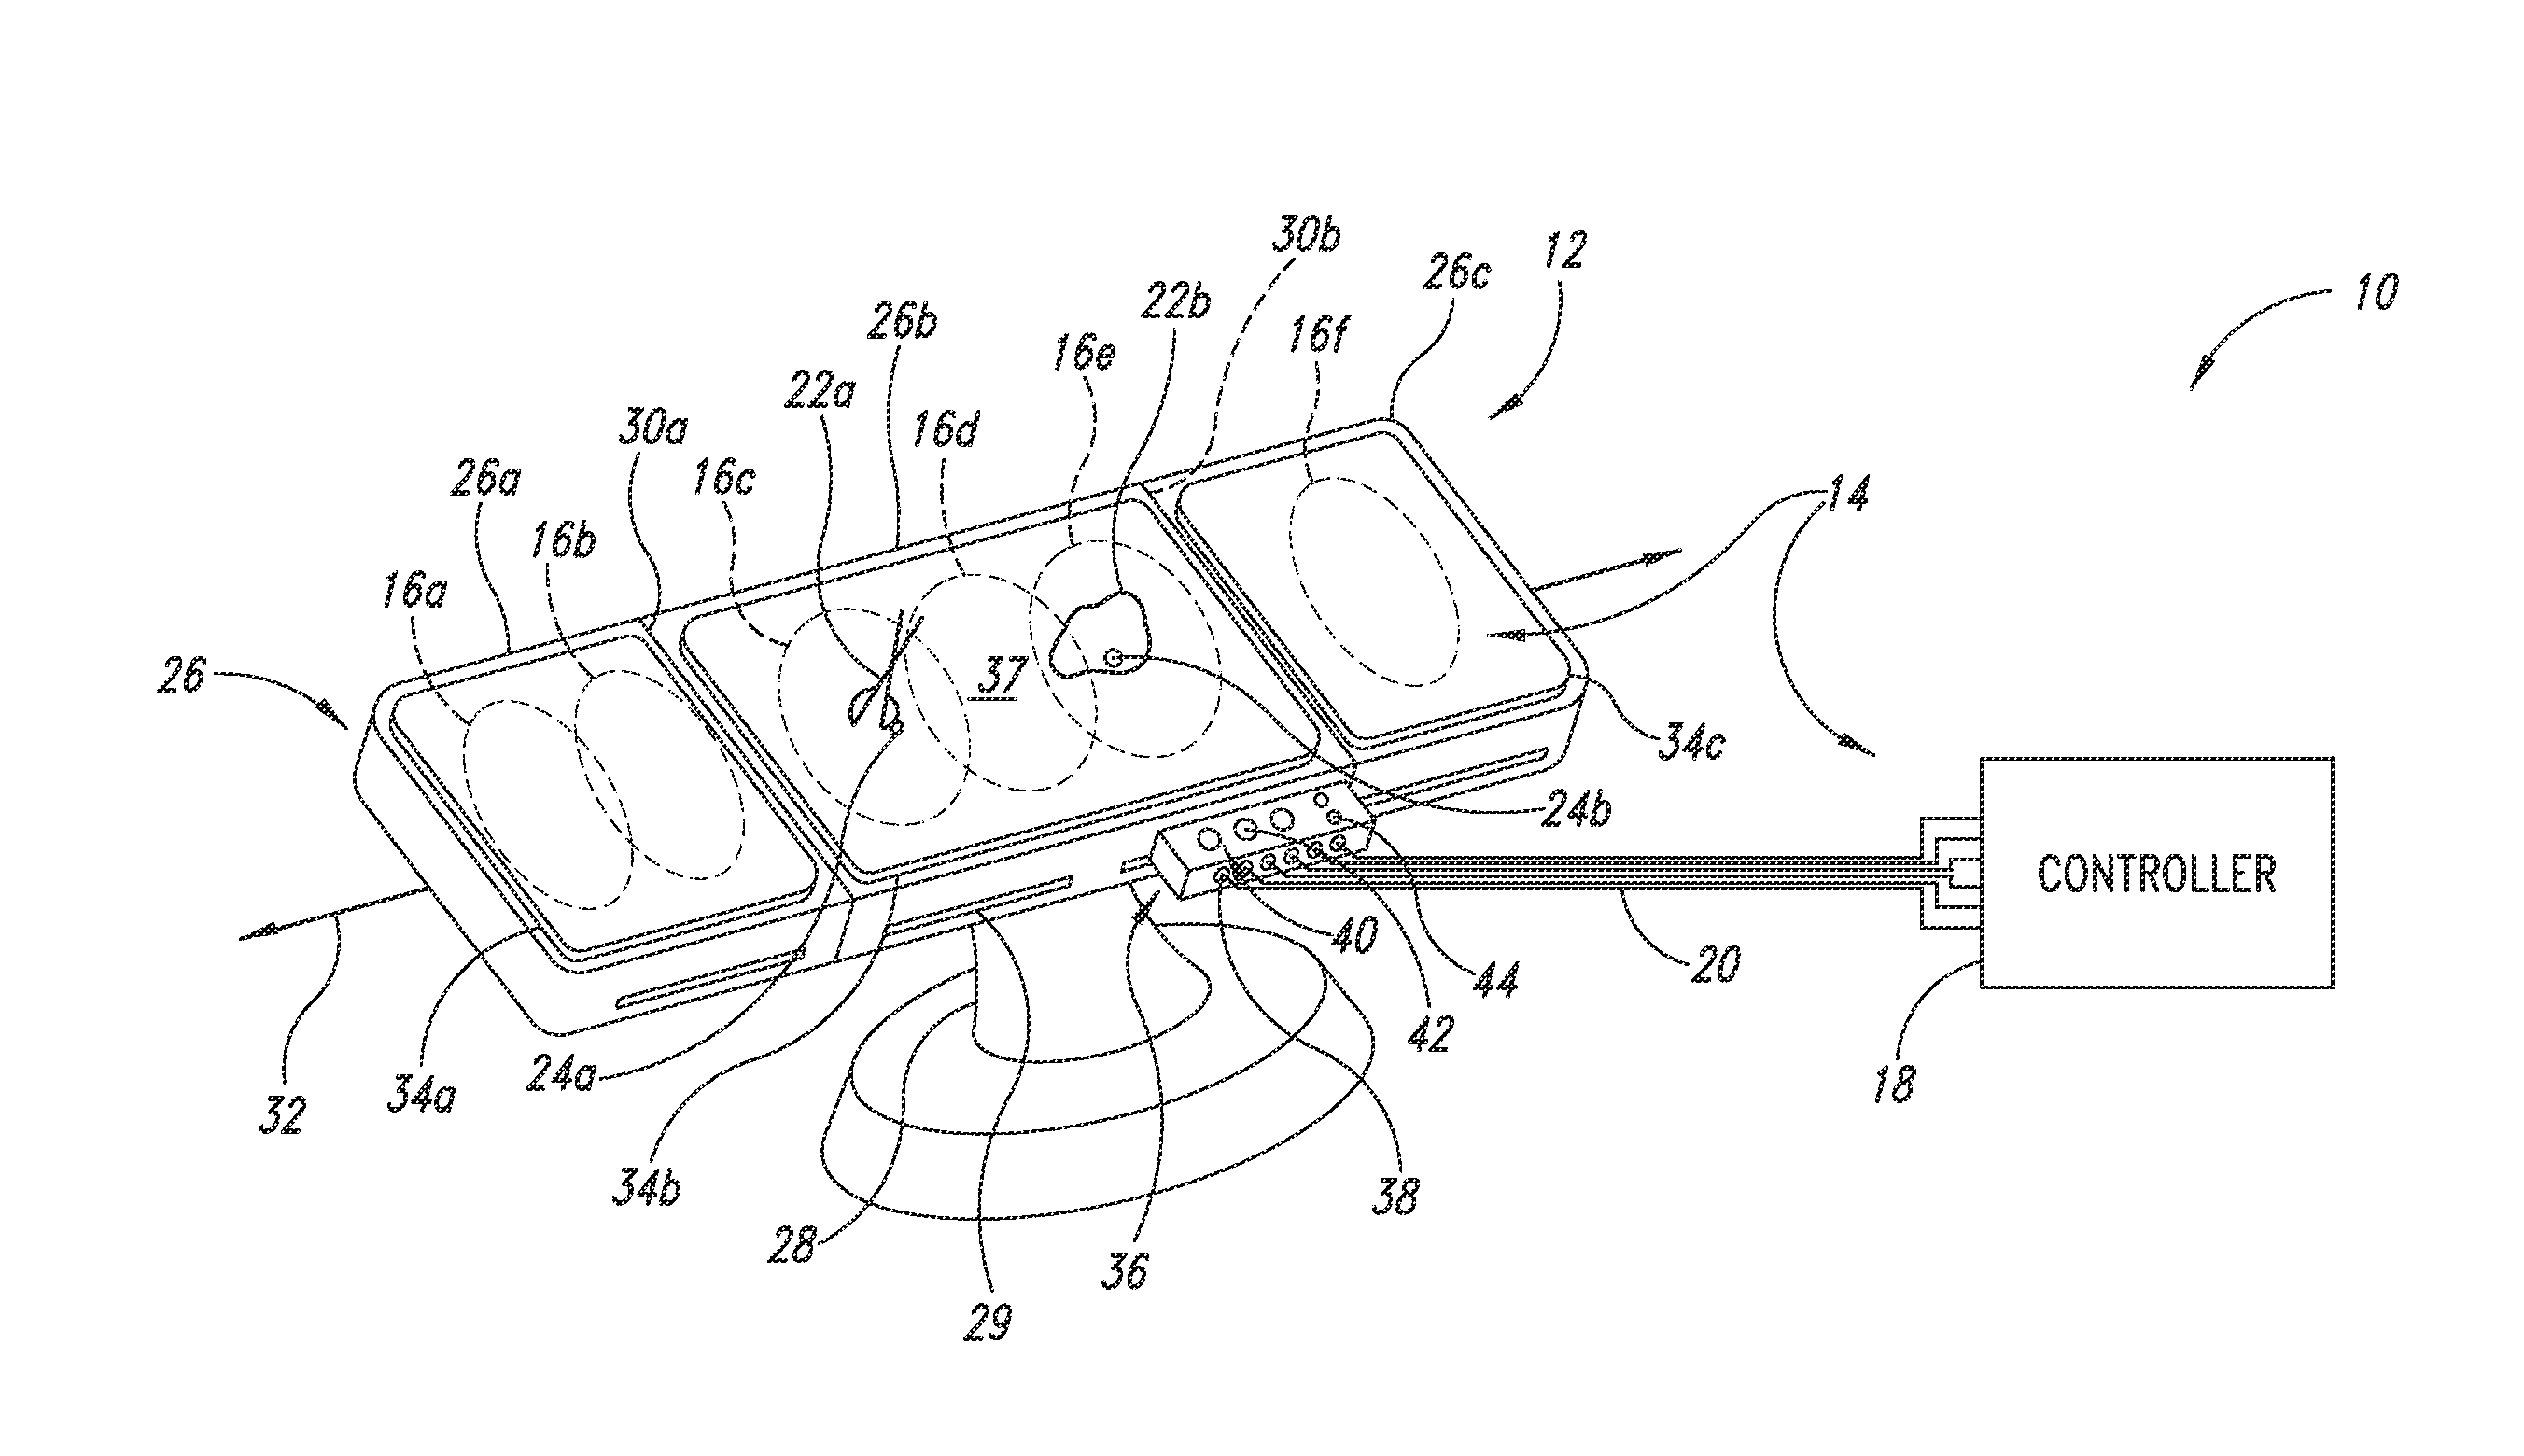 Method and apparatus to detect transponder tagged objects, for example during medical procedures